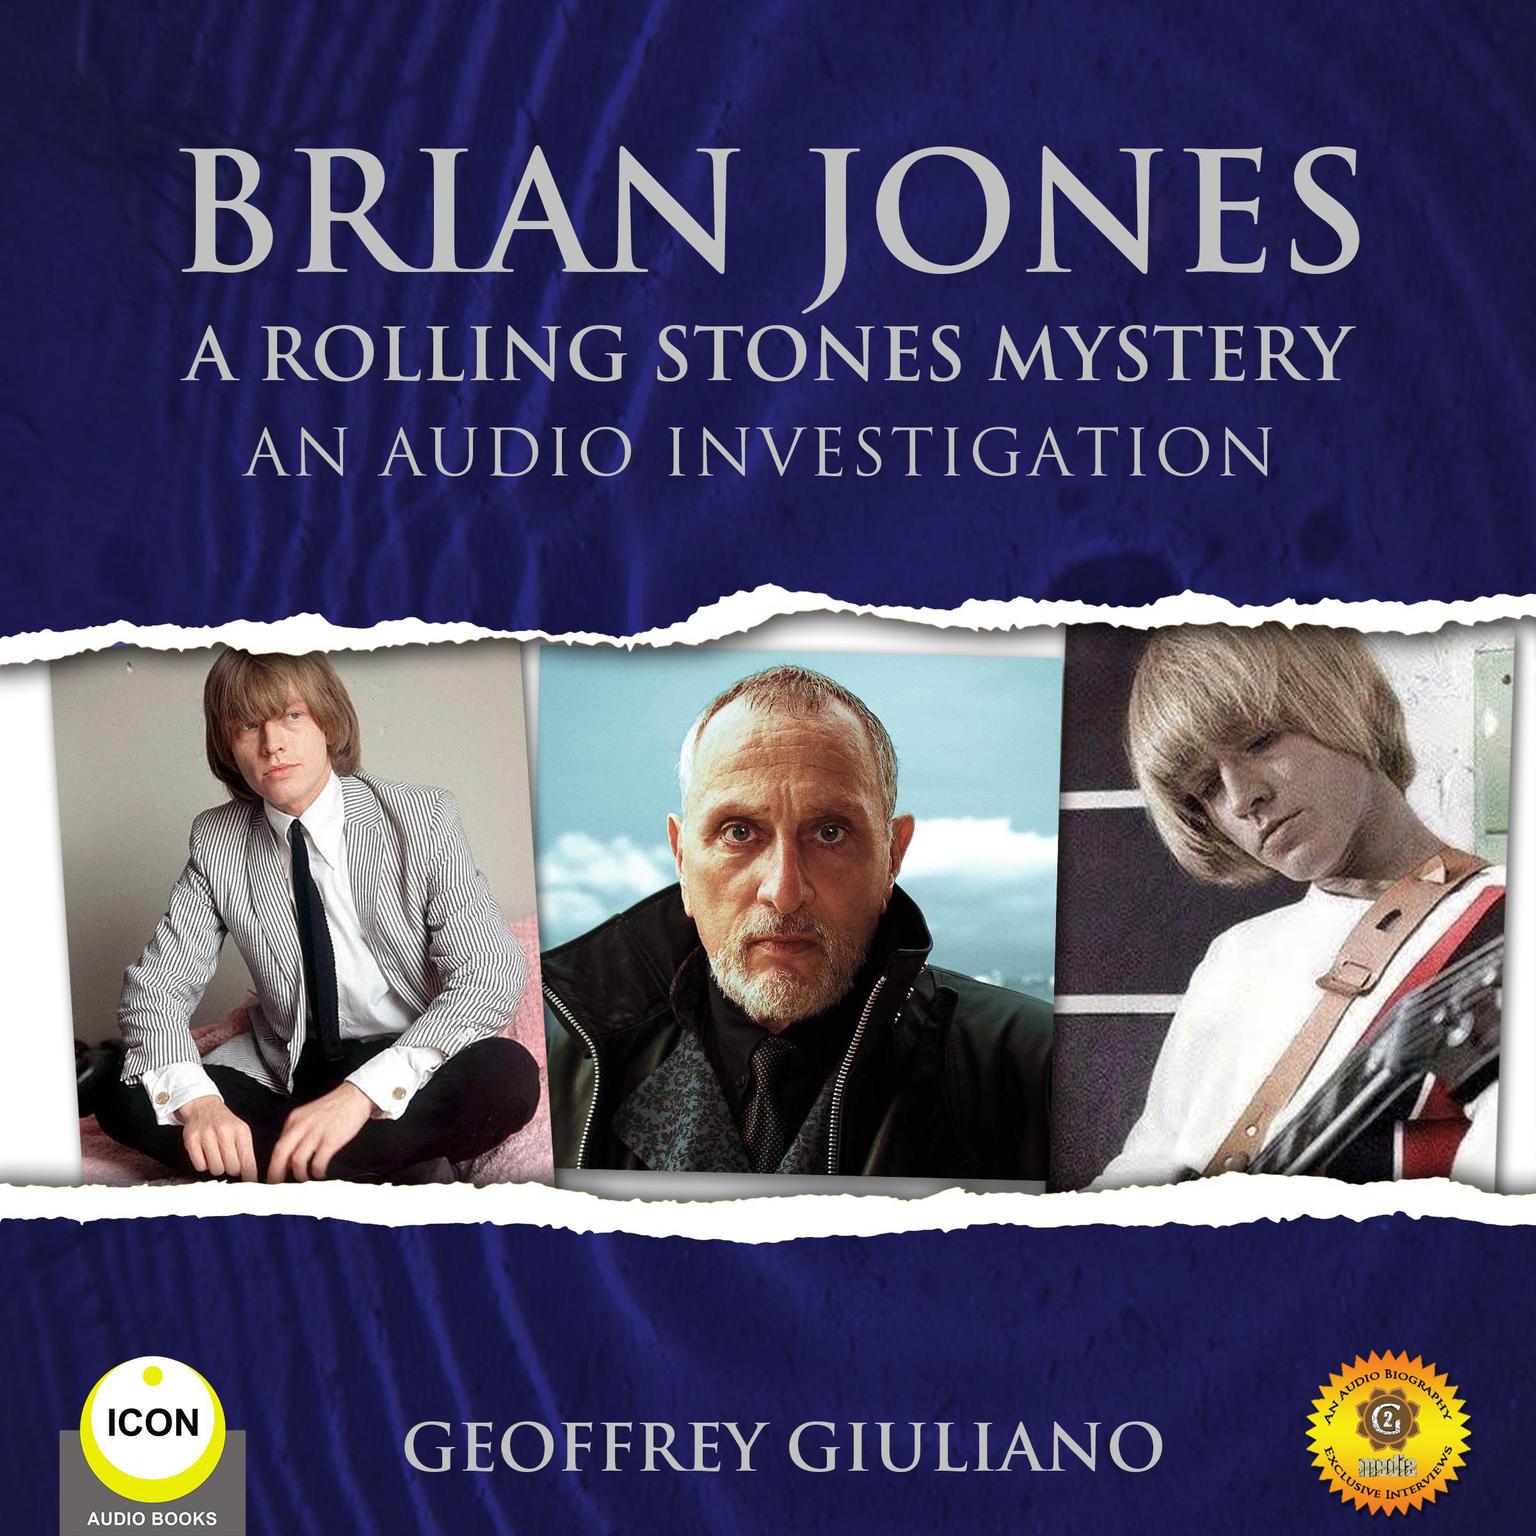 Brian Jones A Rolling Stones Mystery - An Audio Investigation Audiobook, by Geoffrey Giuliano